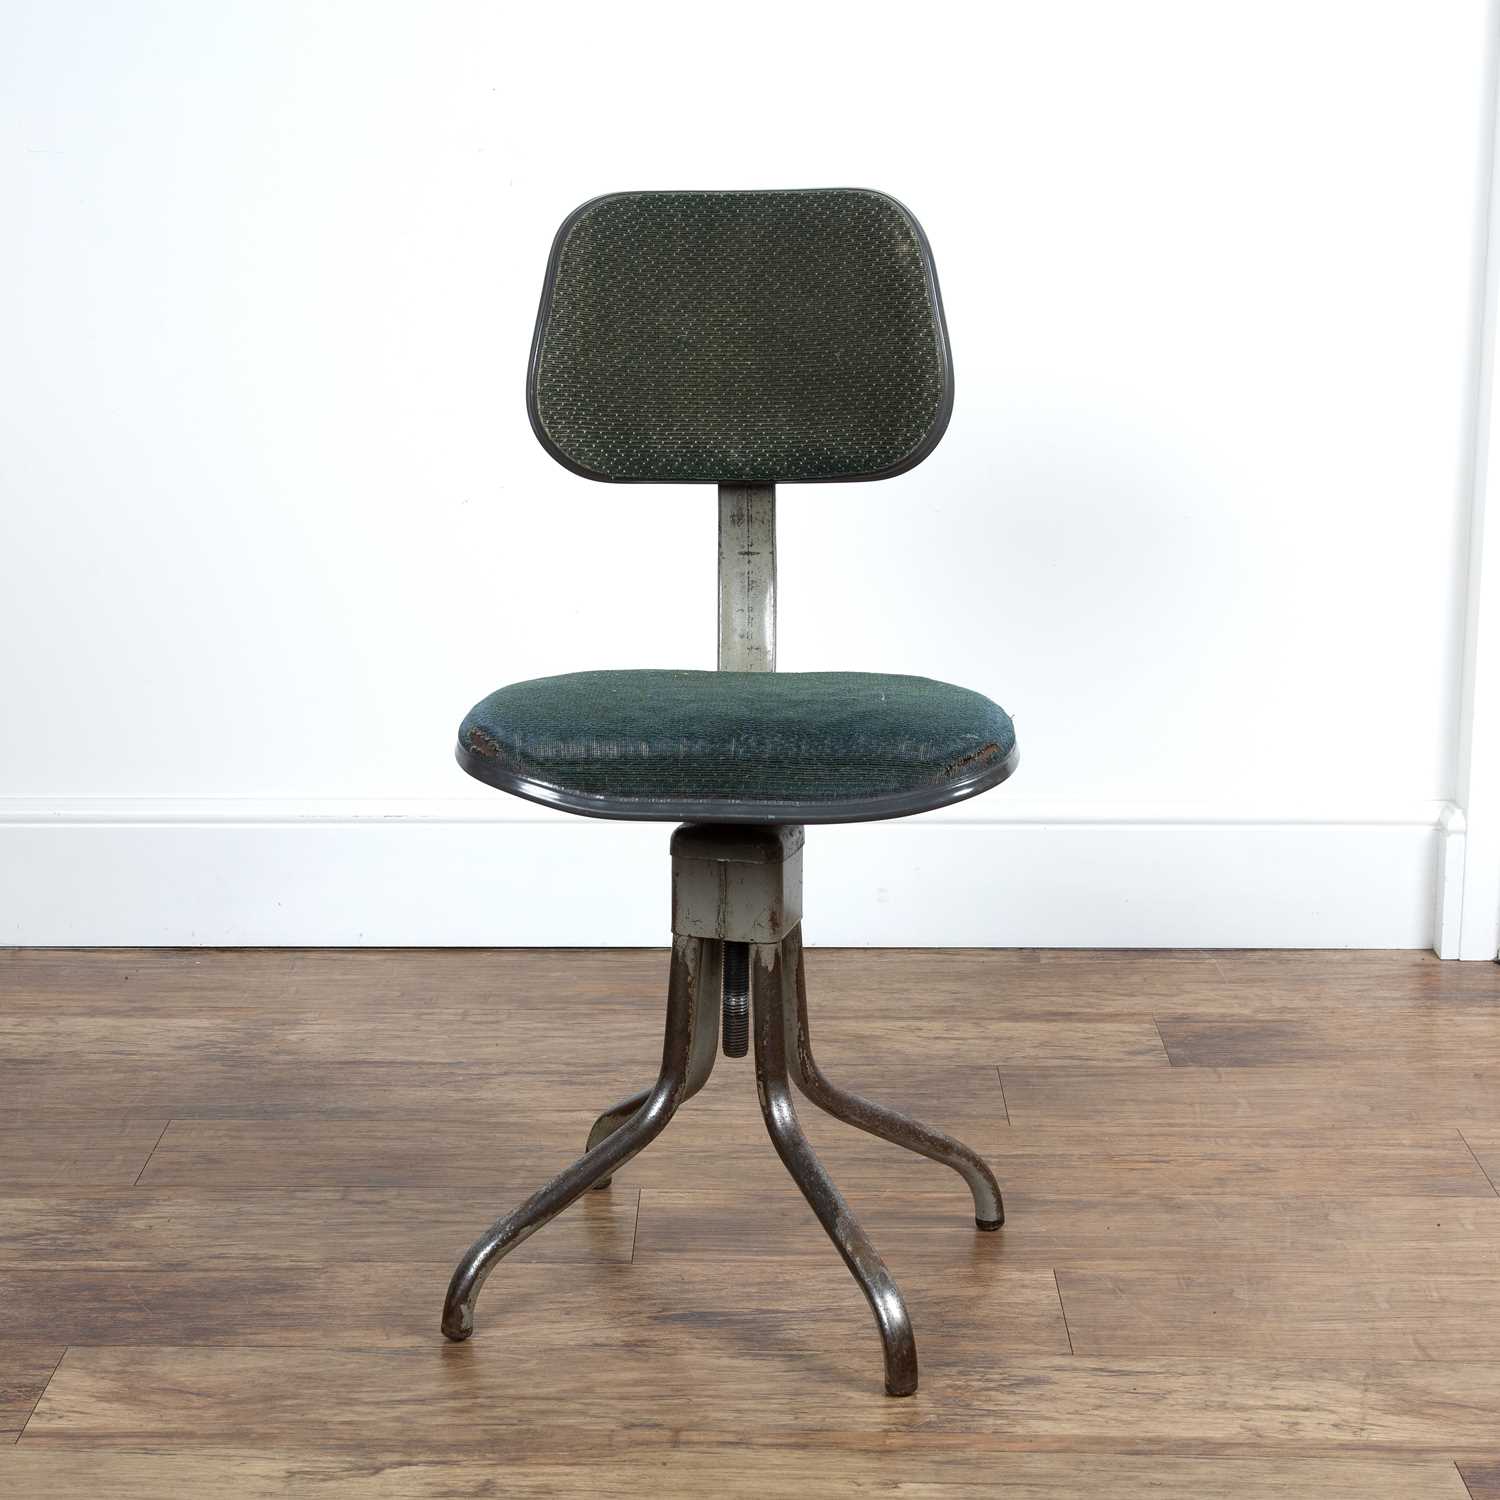 Evertaut industrial factory stool or chair, marked 'Pat no 972.460' 'Pat nos 752215, 839143'